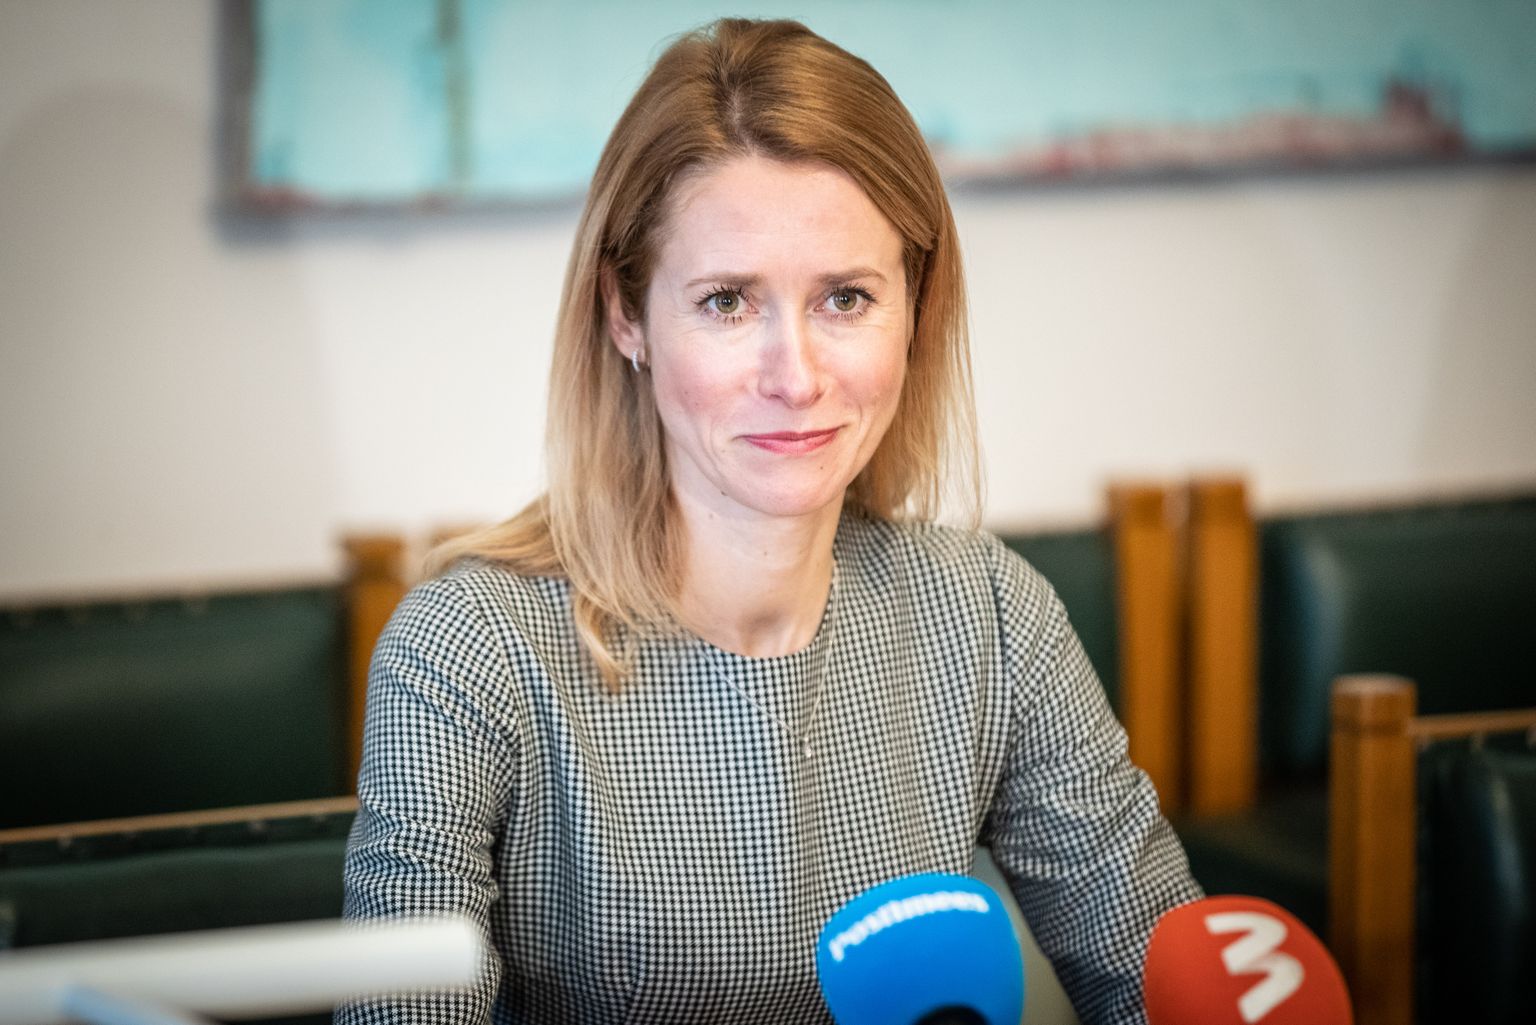 The Reform Party and Center Party presented their ministerial candidates for Kaja Kallas’ government on Sunday morning.